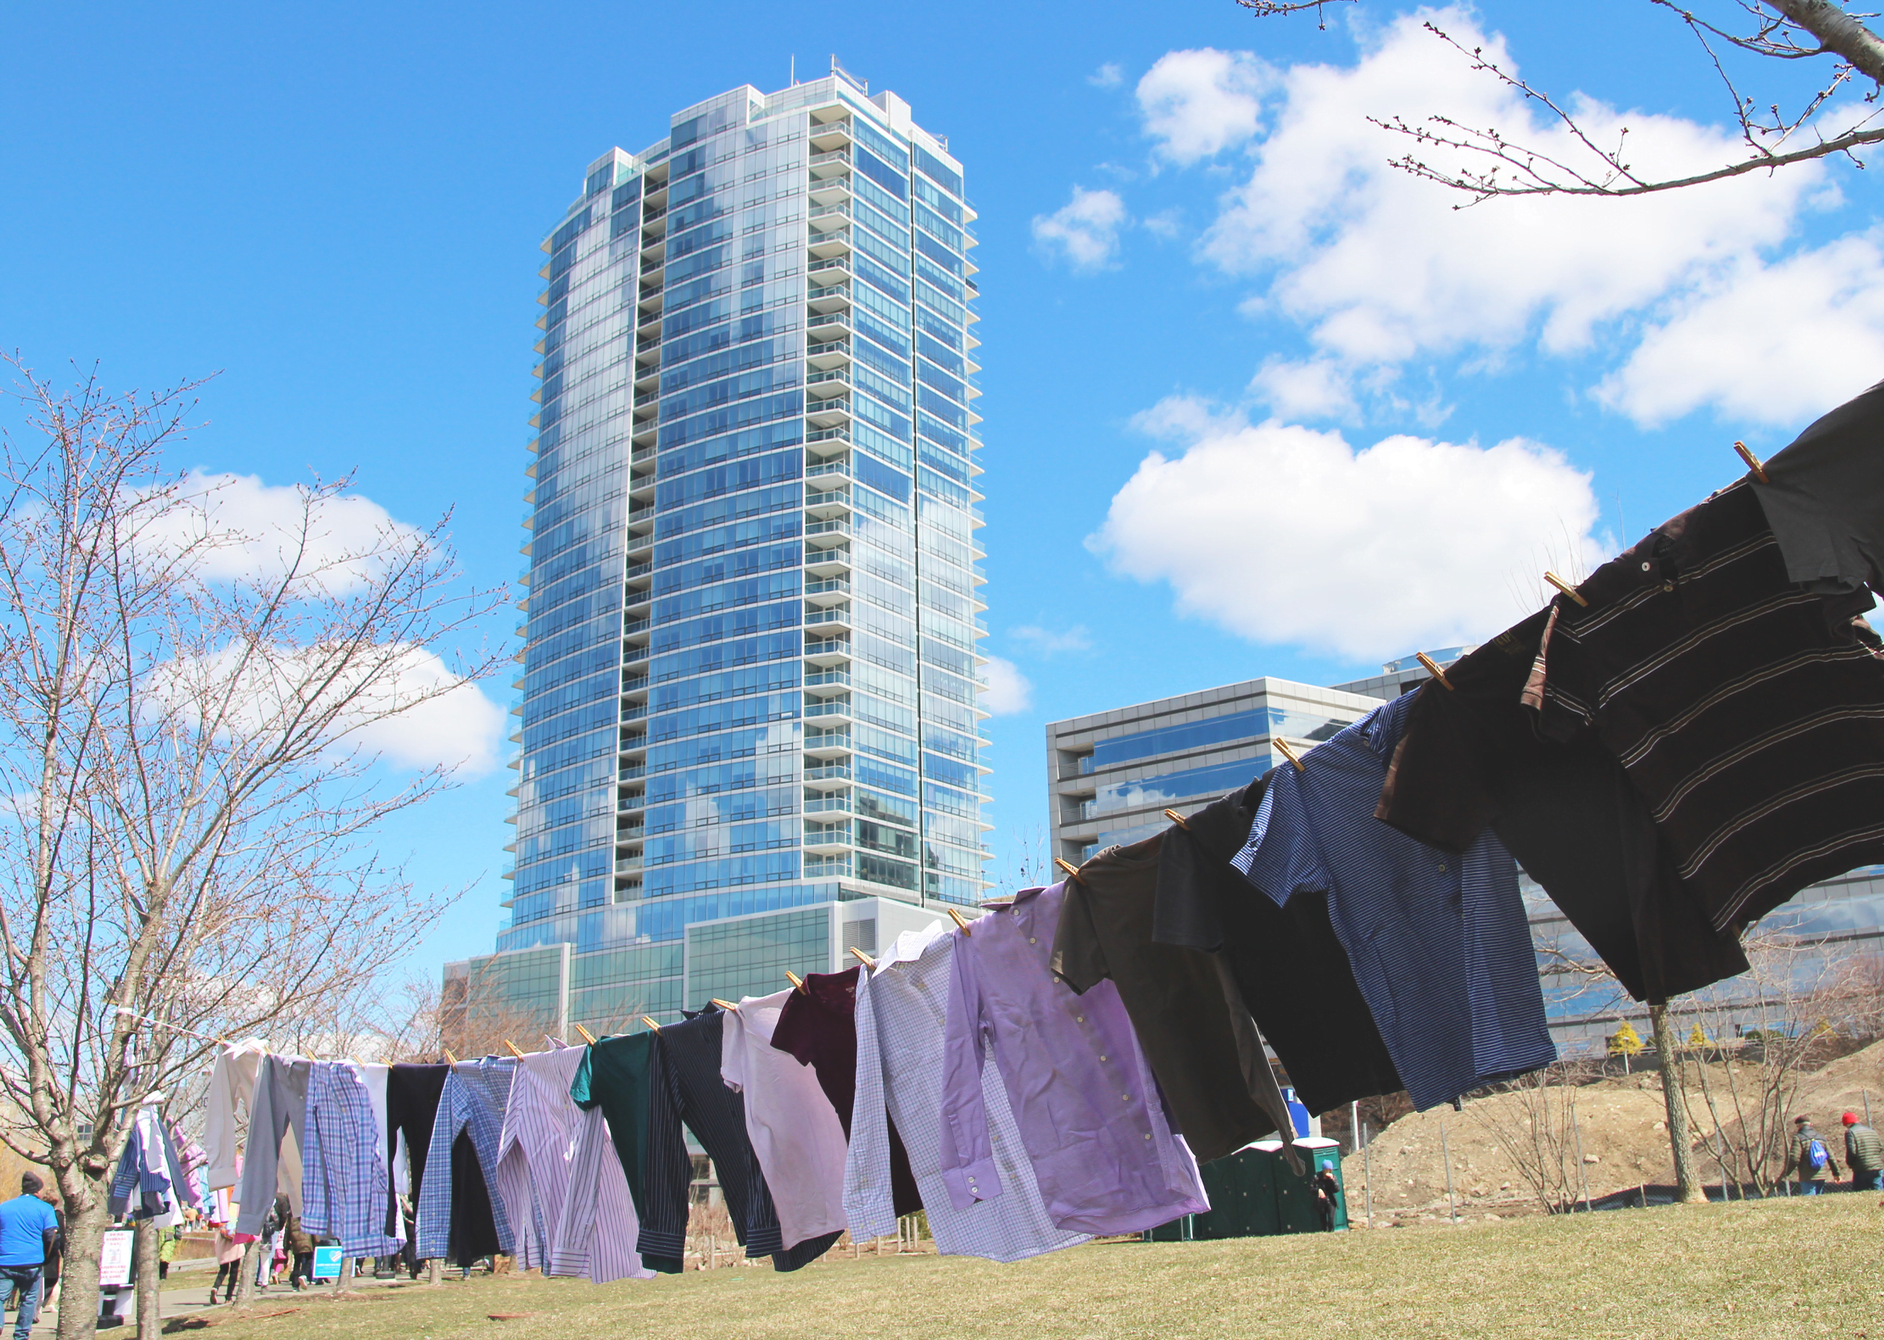 A total of 96 shirts were strung on clothes line along Mill River Park to represent the number of lives lost to guns every day in the US. Background, Trump Parc Stamford at 1 Broad Street. March 24, 2018 Photo: Leslie Yager